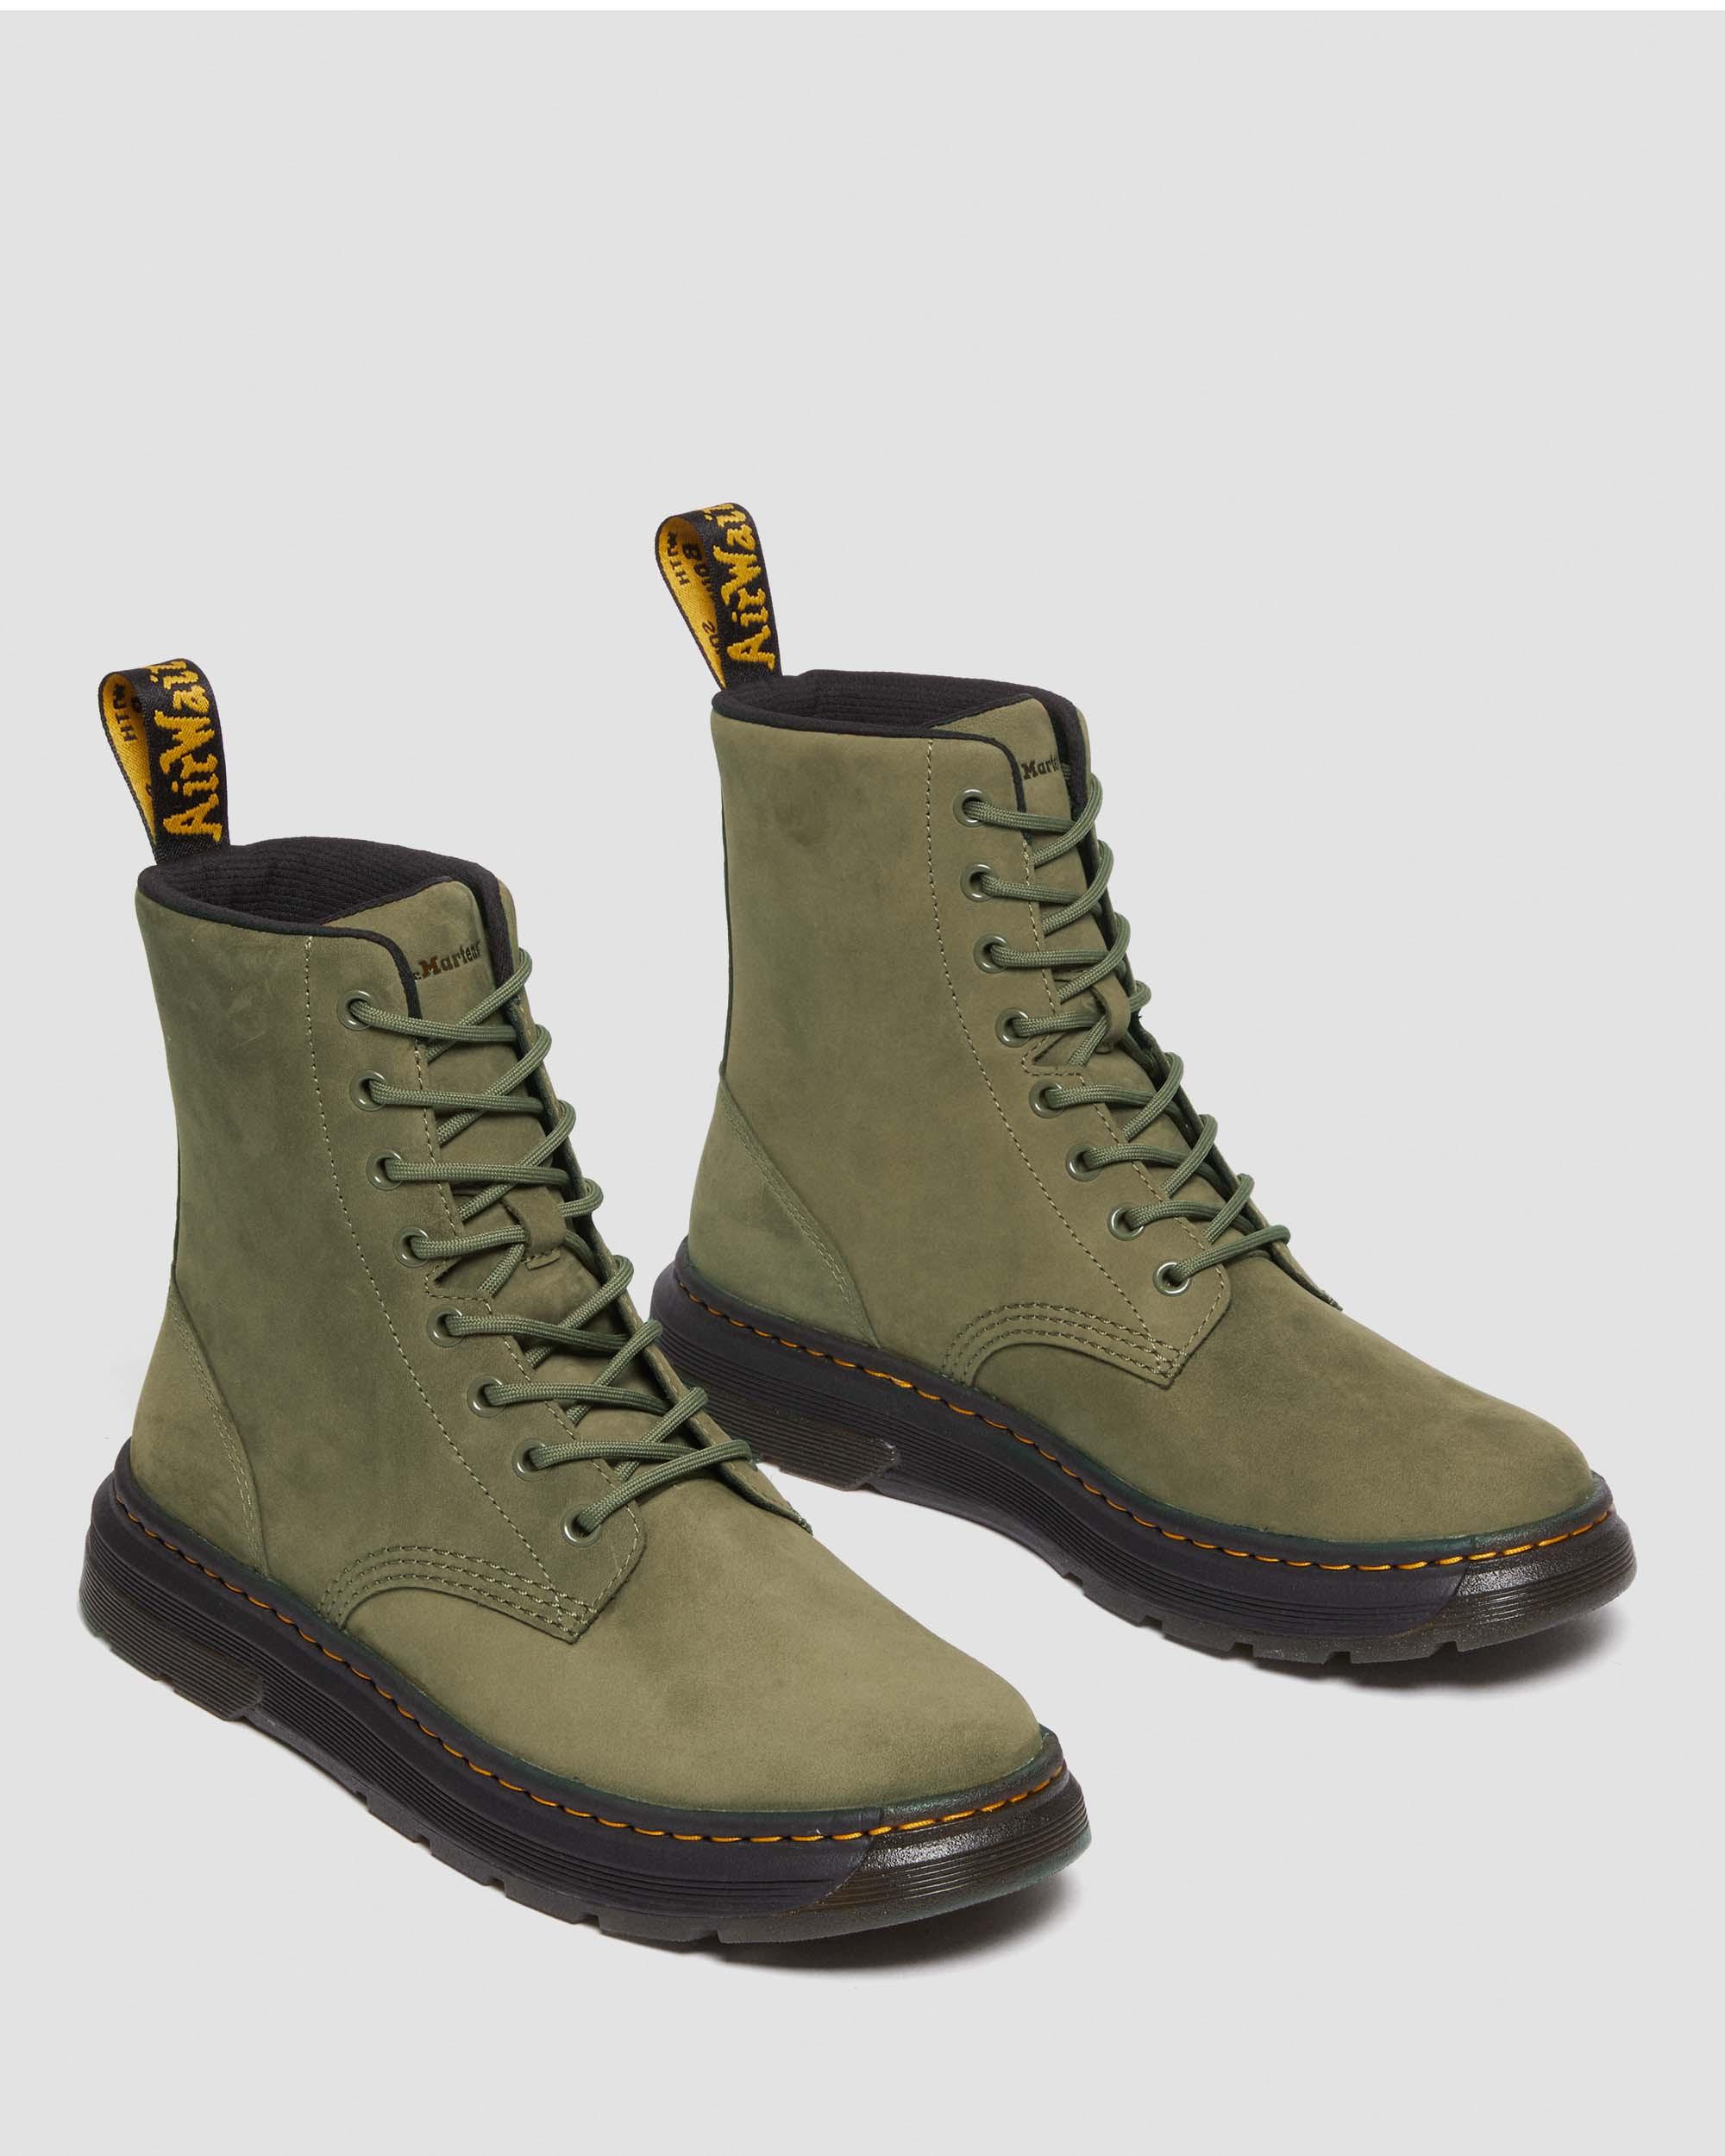 Crewson Nubuck Leather Everyday Boots in DMS OLIVE